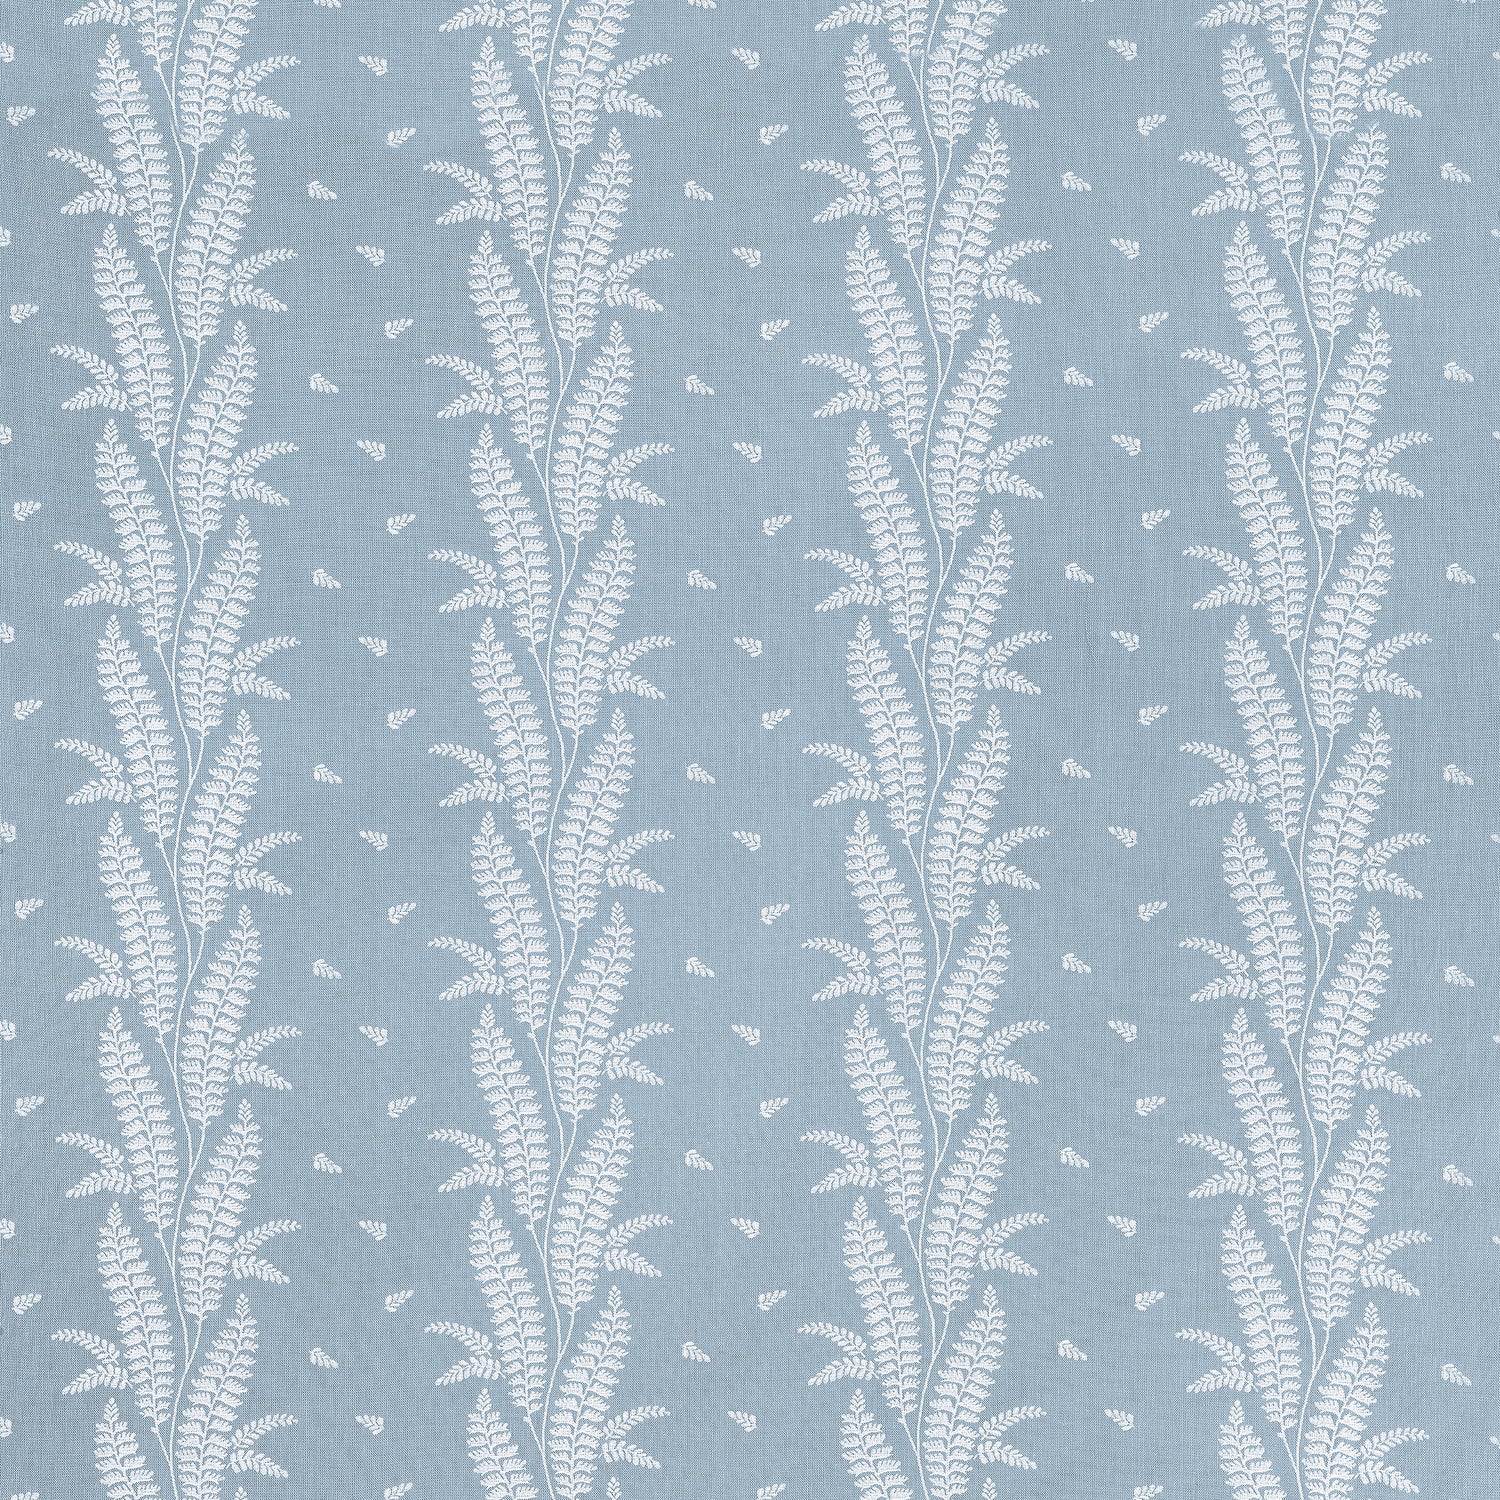 Ensbury Fern fabric in blue color - pattern number AW57827 - by Anna French in the Bristol collection